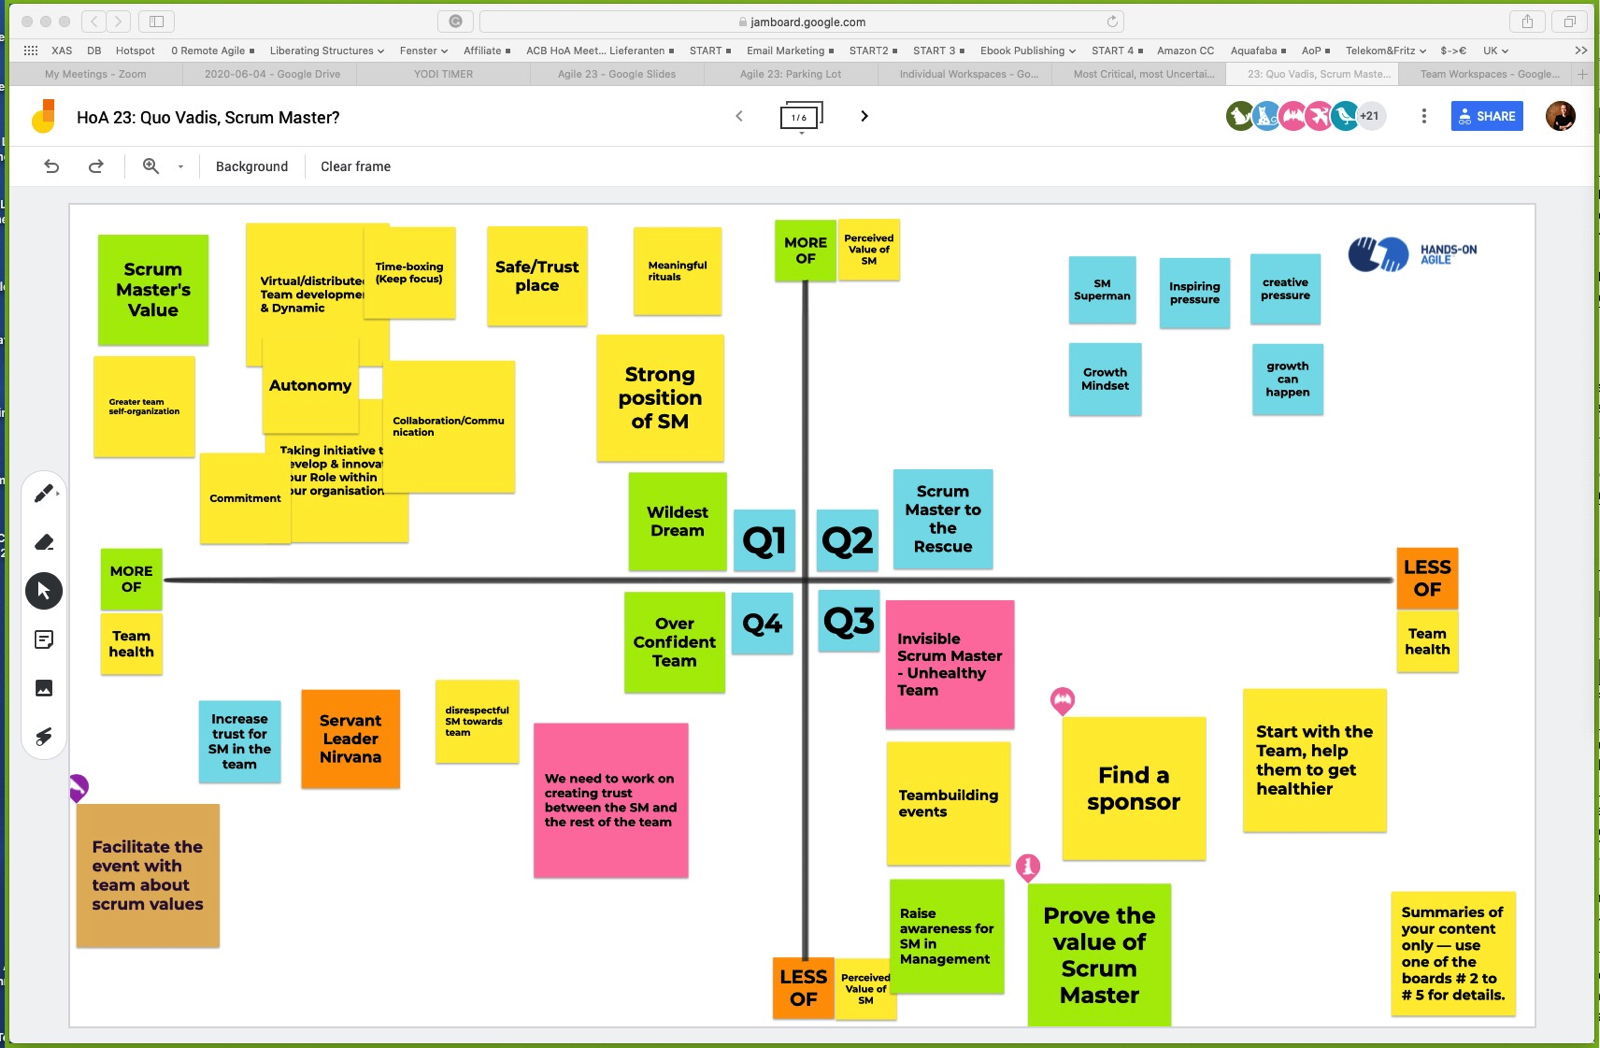 Quo Vadis, Scrum Master: The Results of Our Virtual Strategy Session — Hands-on Agile 23